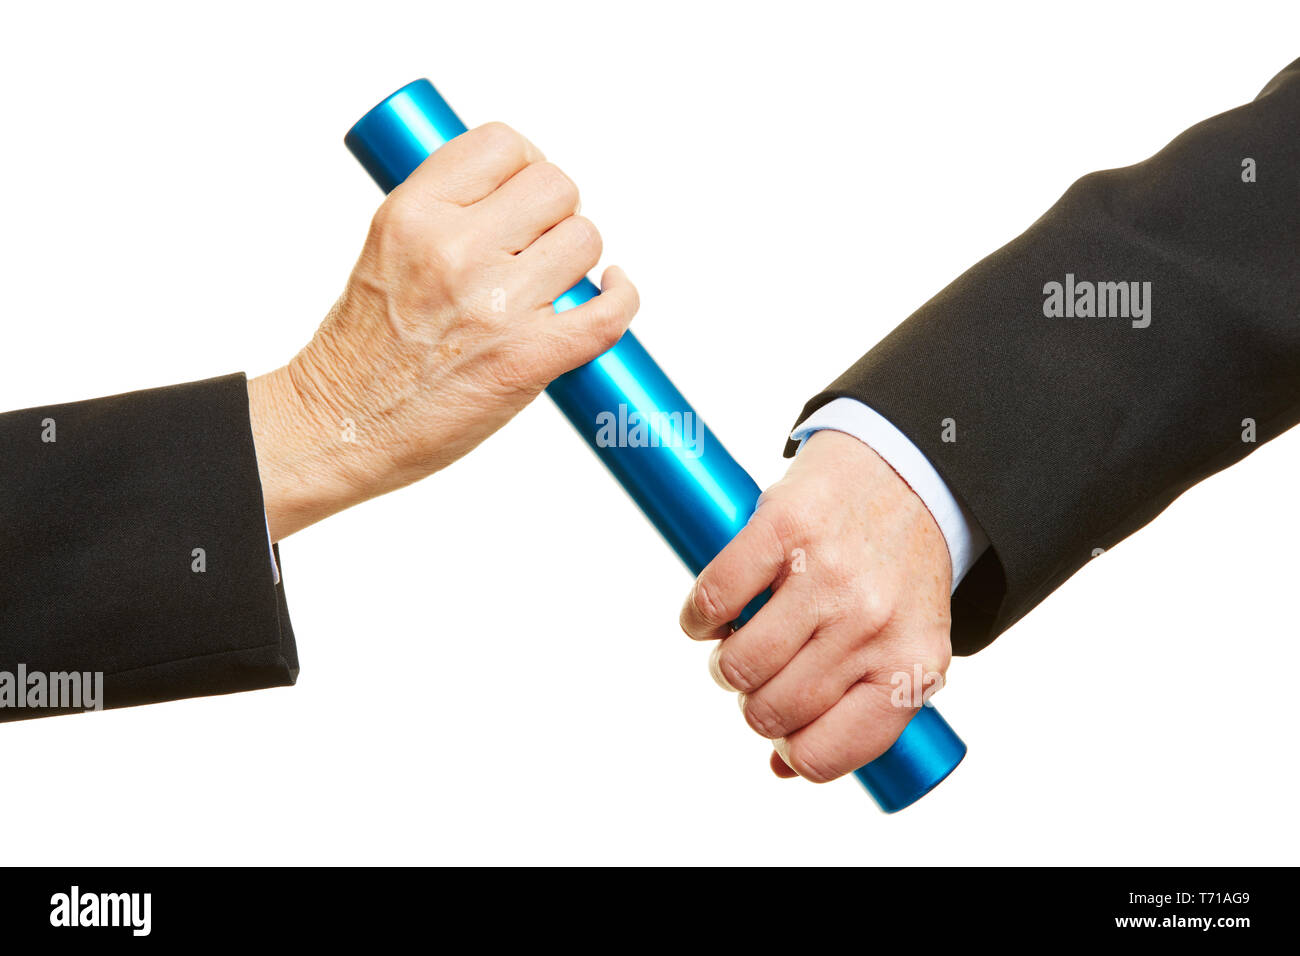 Hands hand over a blue baton during the relay race Stock Photo